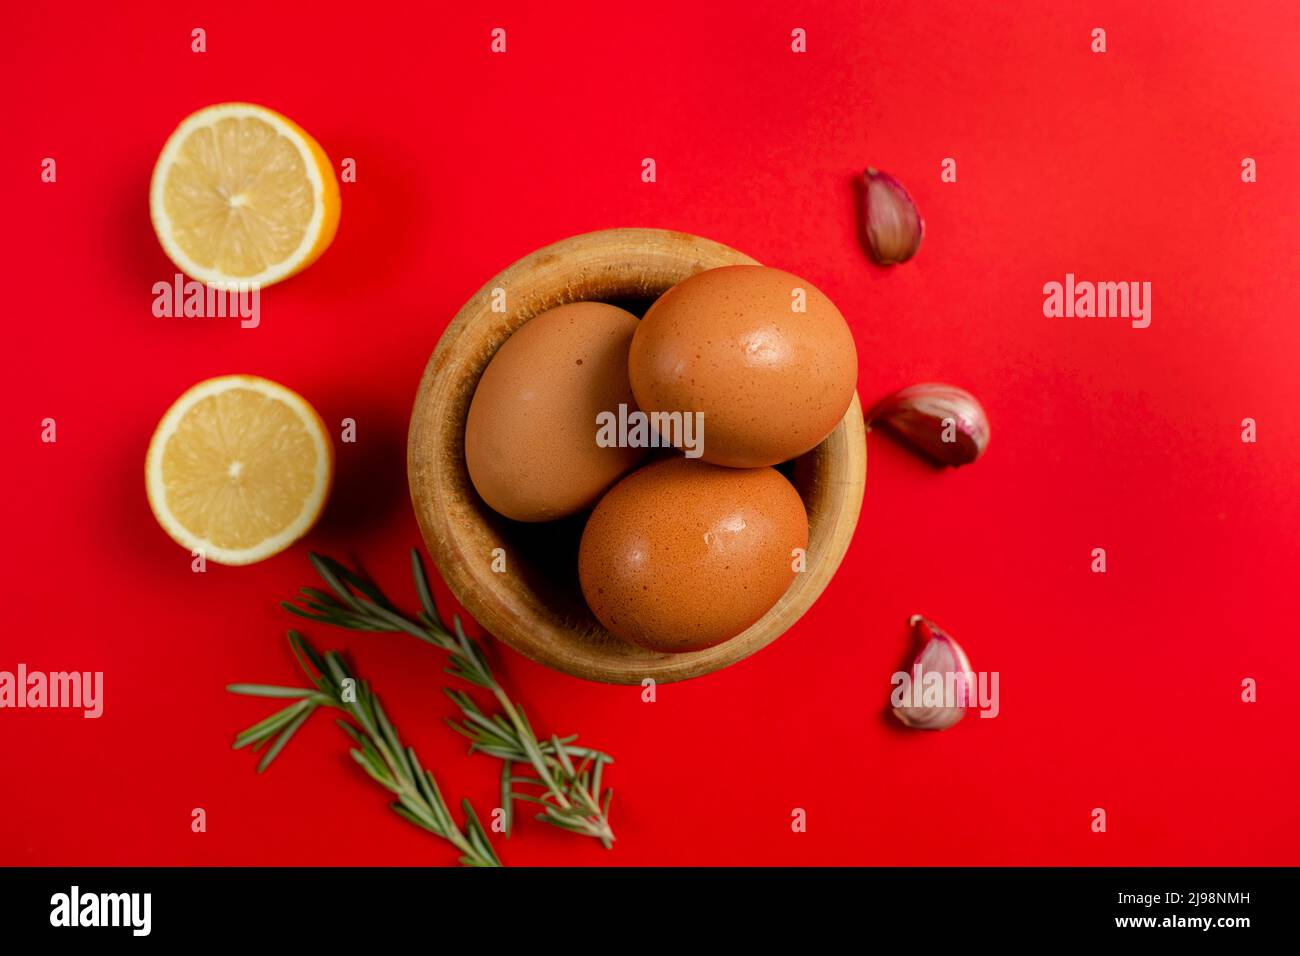 Top view of eggs, lemons and garlic ingredients needed to make the rich homemade alioli sauce typical Spanish sauce Stock Photo